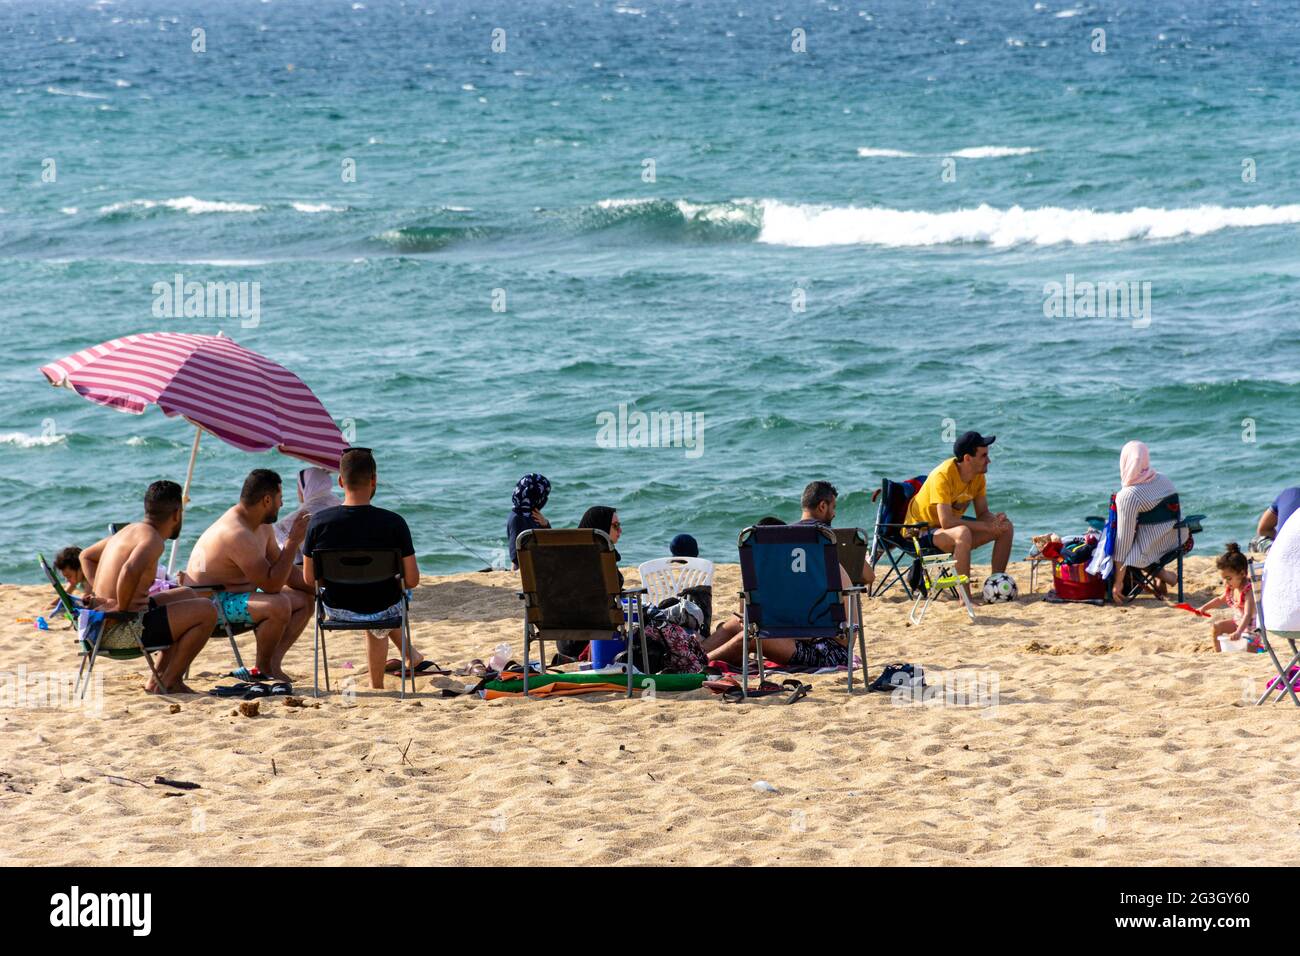 Group of young people on the beach, summer vacation. Stock Photo